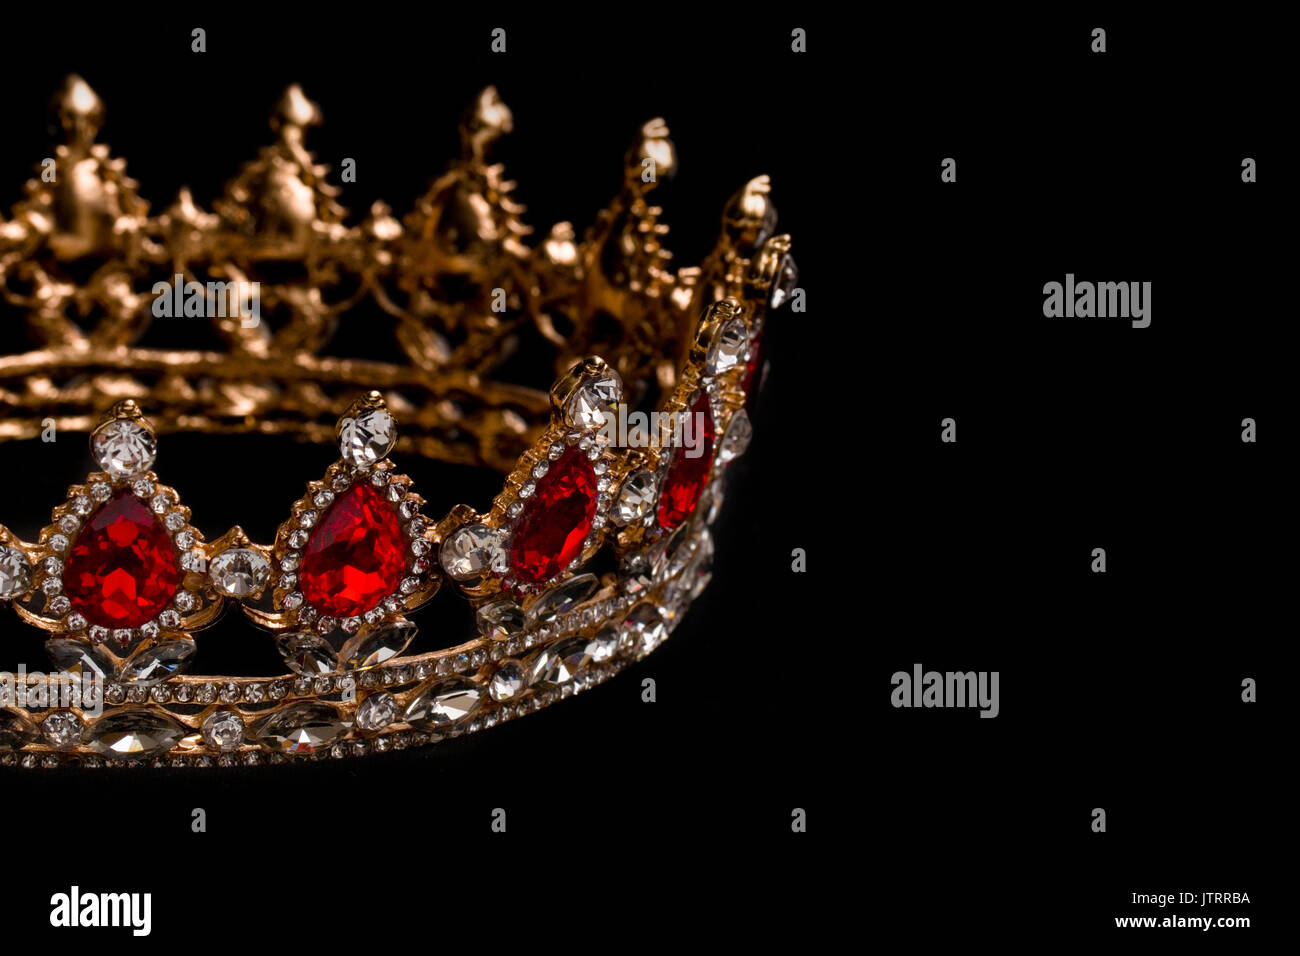 Crown Jewels High Resolution Stock Photography and Images - Alamy